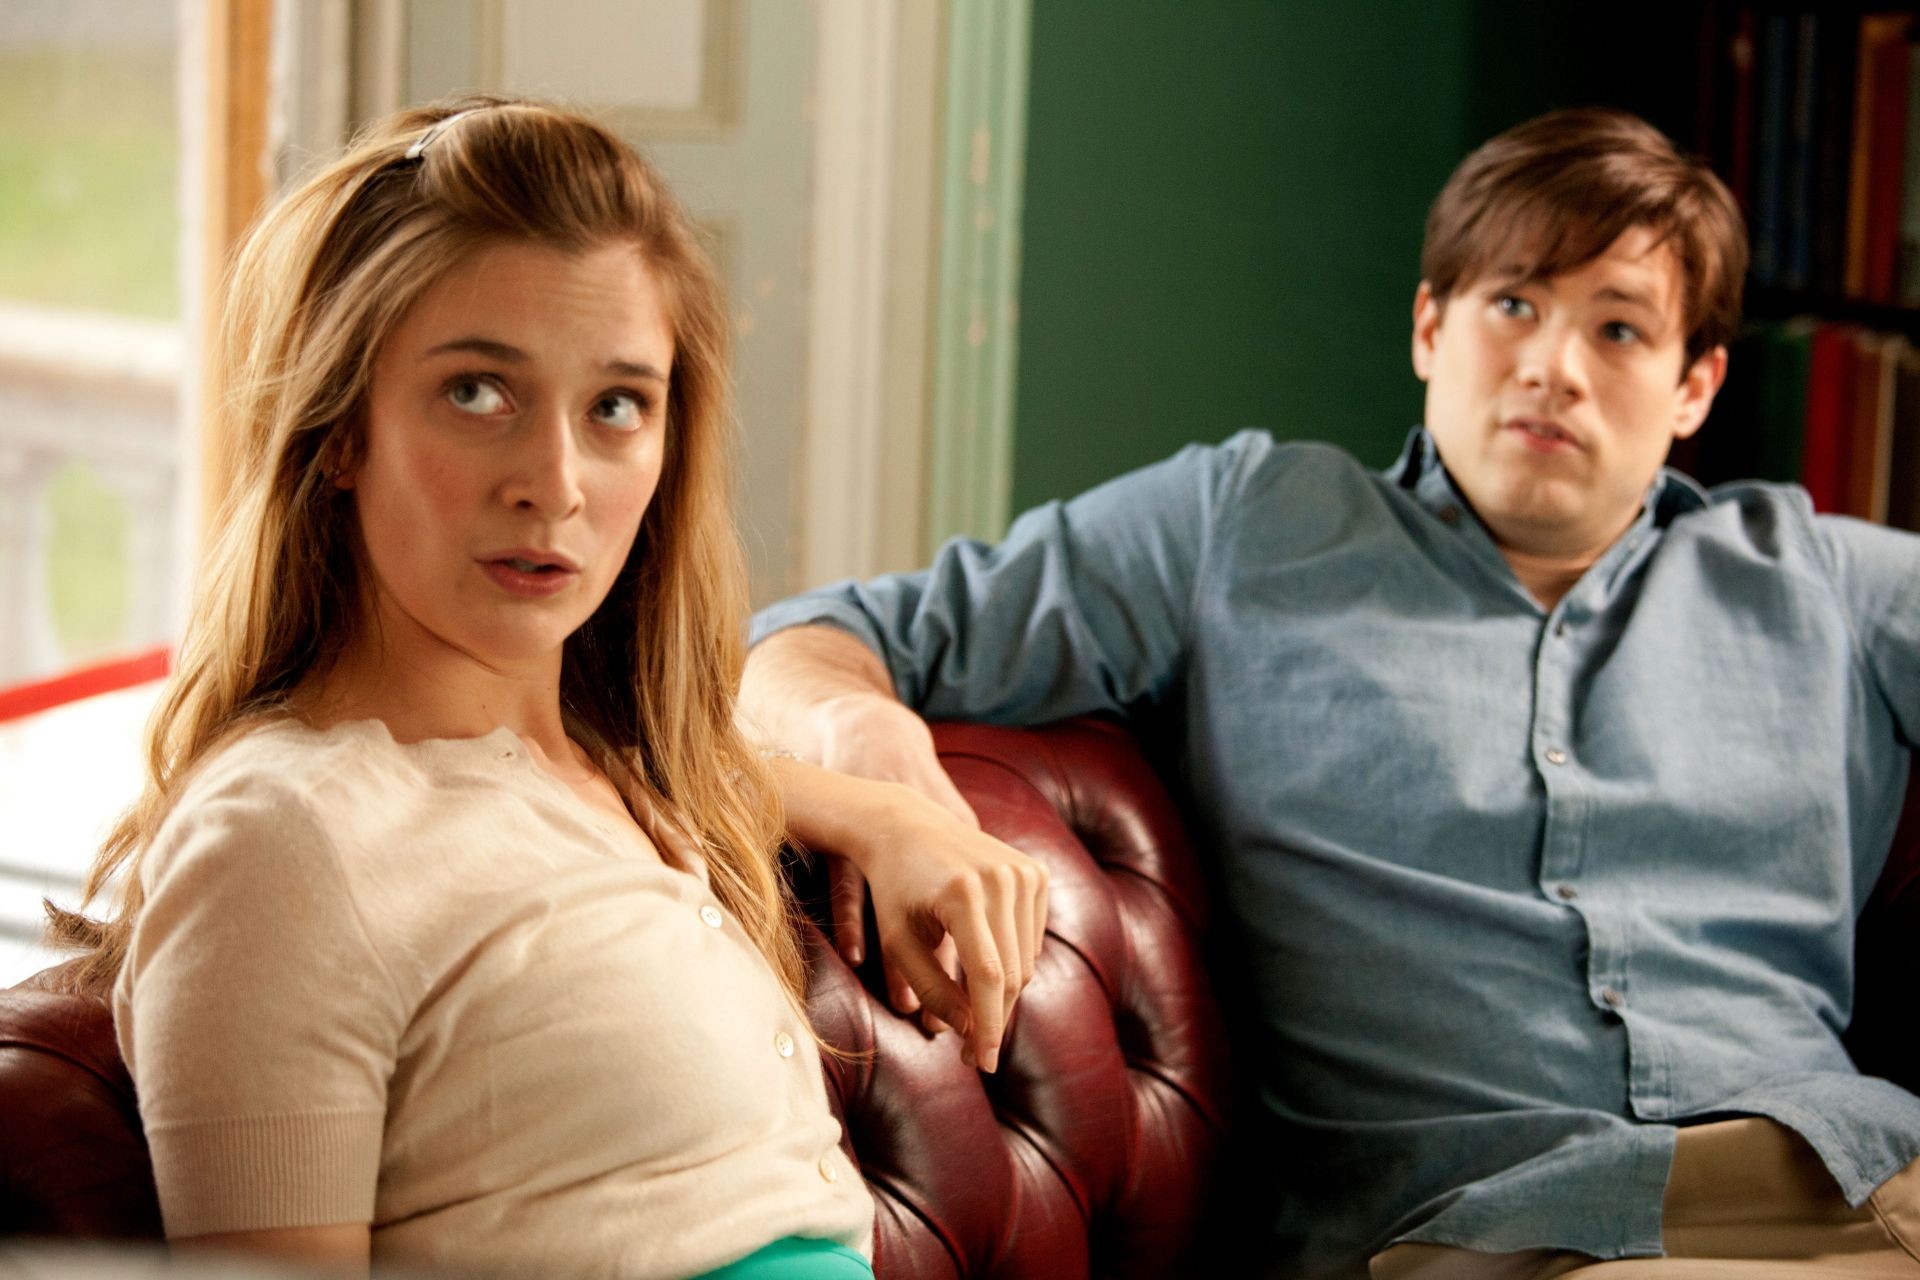 Caitlin Fitzgerald stars as Priss and Ryan Metcalf stars as Frank in Sony Pictures Classics' Damsels in Distress (2012). Photo credit by Sabrina Lantos.